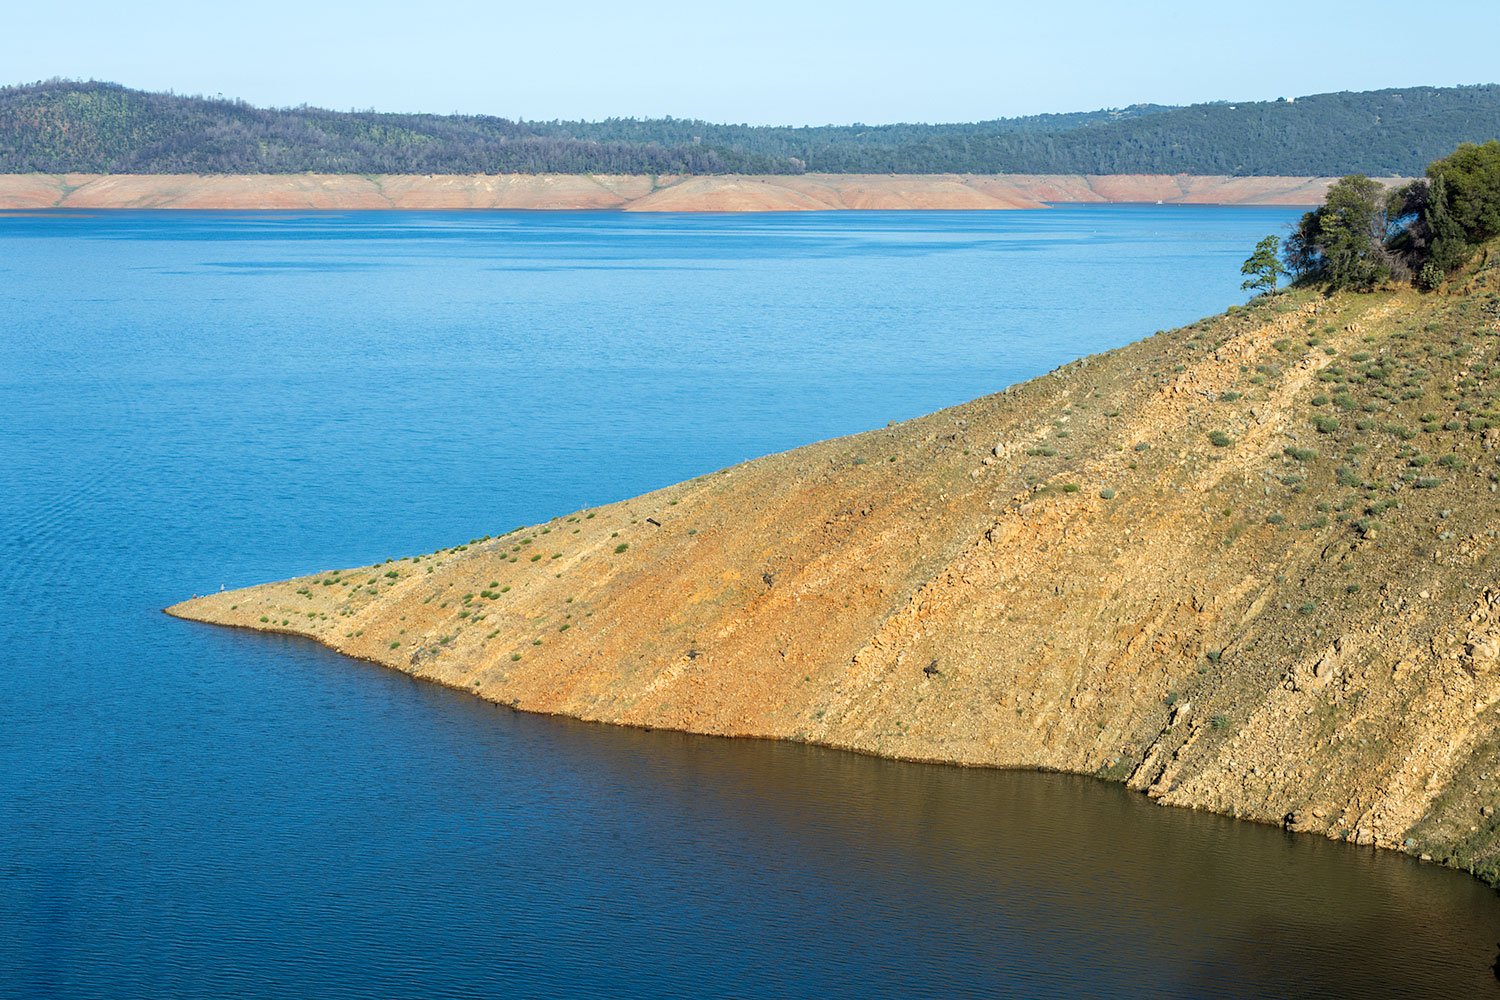 Fishing at the Point. Lake Oroville Reservoir. Oroville, CA. 2022 (39°33'5.868" N 121°25'47.106" W)